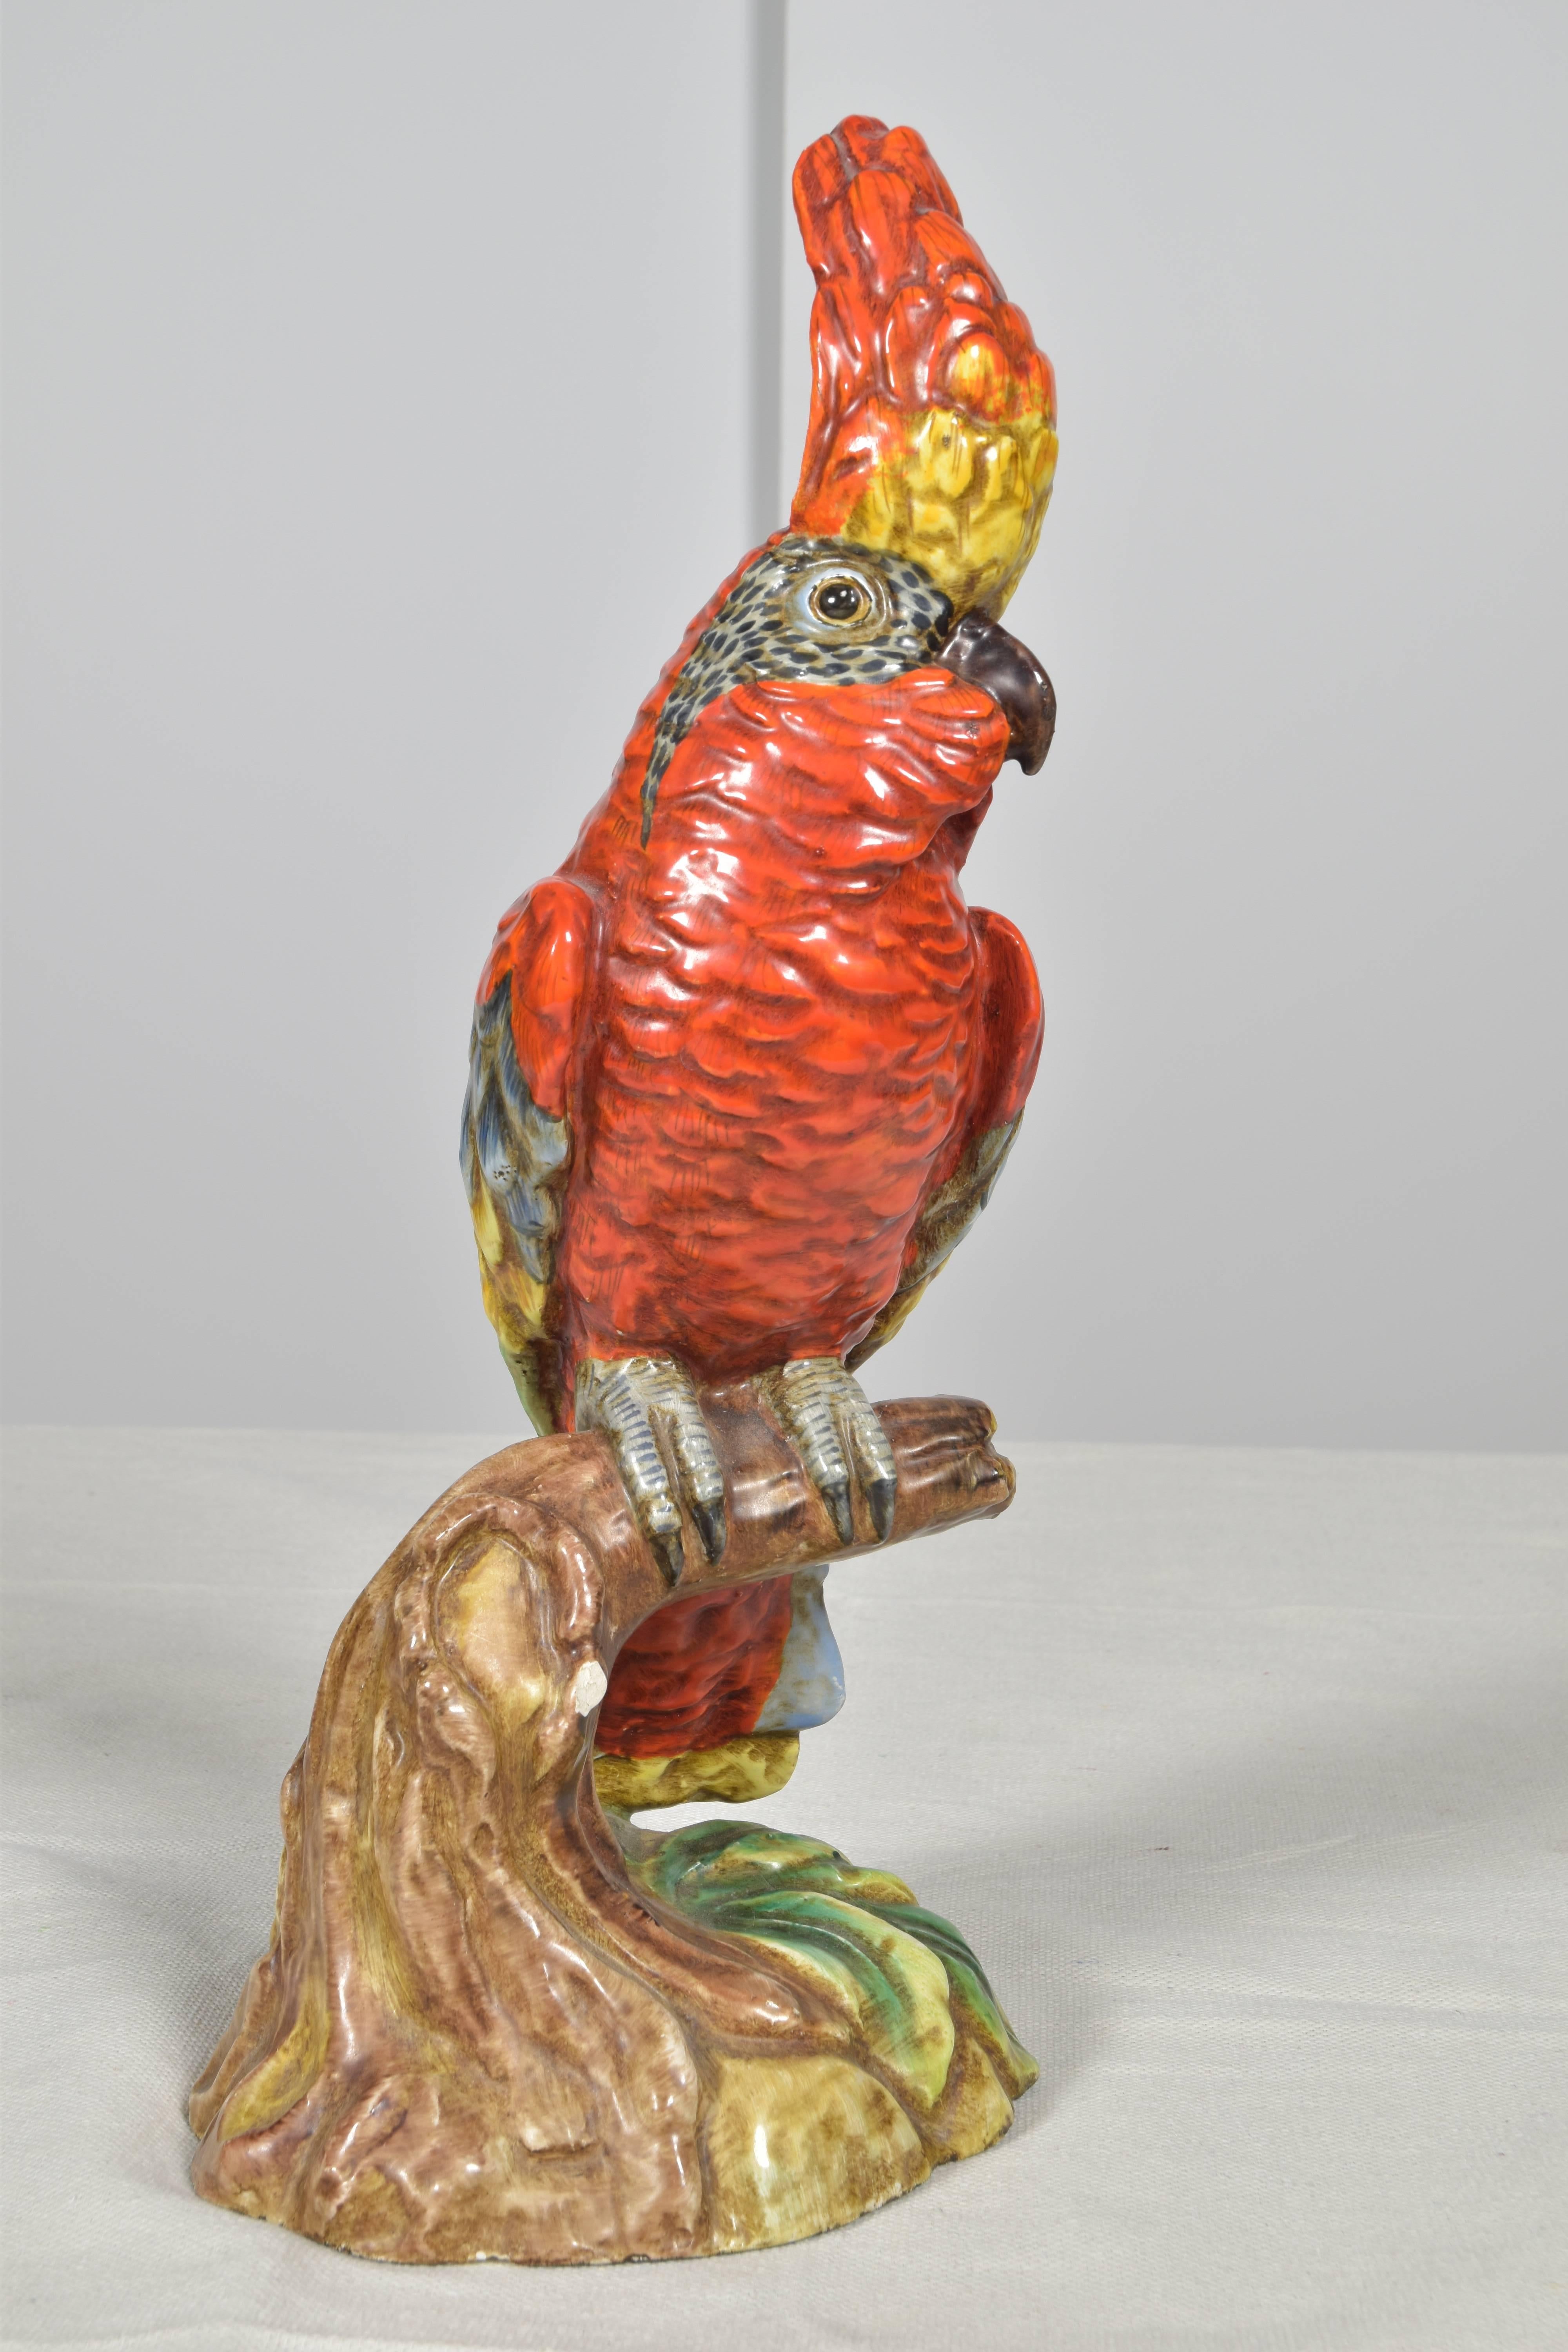 Charming pair of vintage Italian birds or parrots in vivid colors: red, green, yellow and brown.